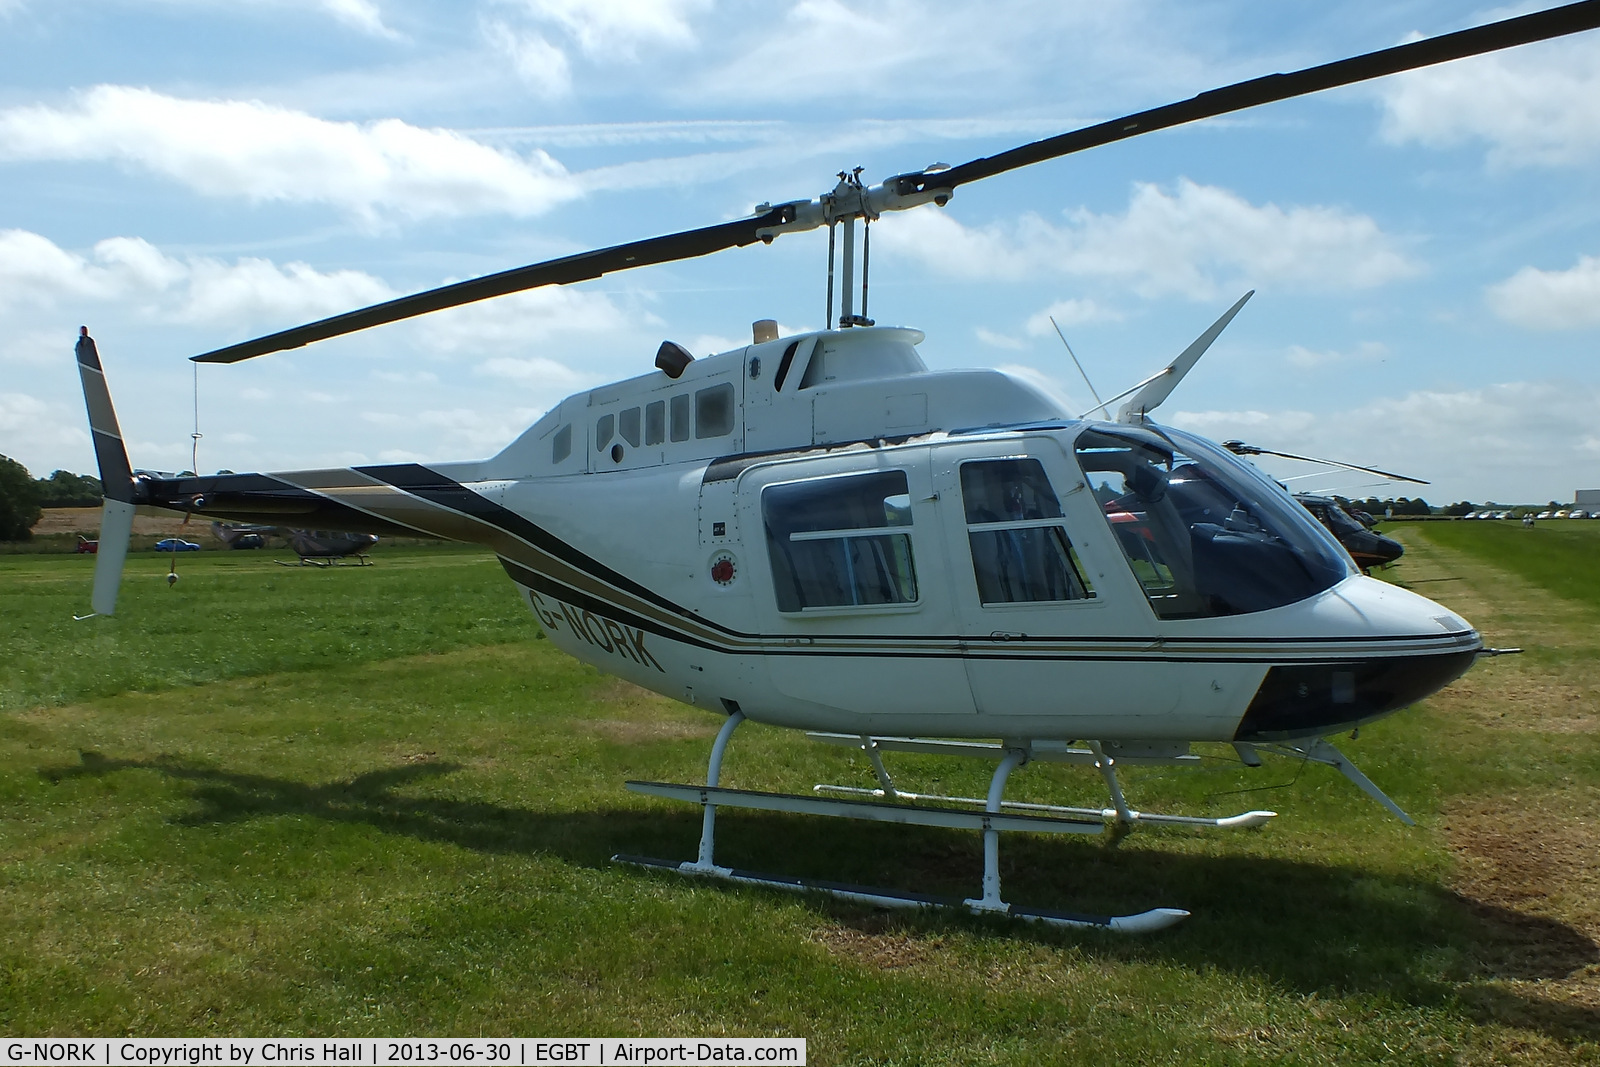 G-NORK, 1982 Bell 206B JetRanger III C/N 3615, being used for ferrying race fans to the British F1 Grand Prix at Silverstone